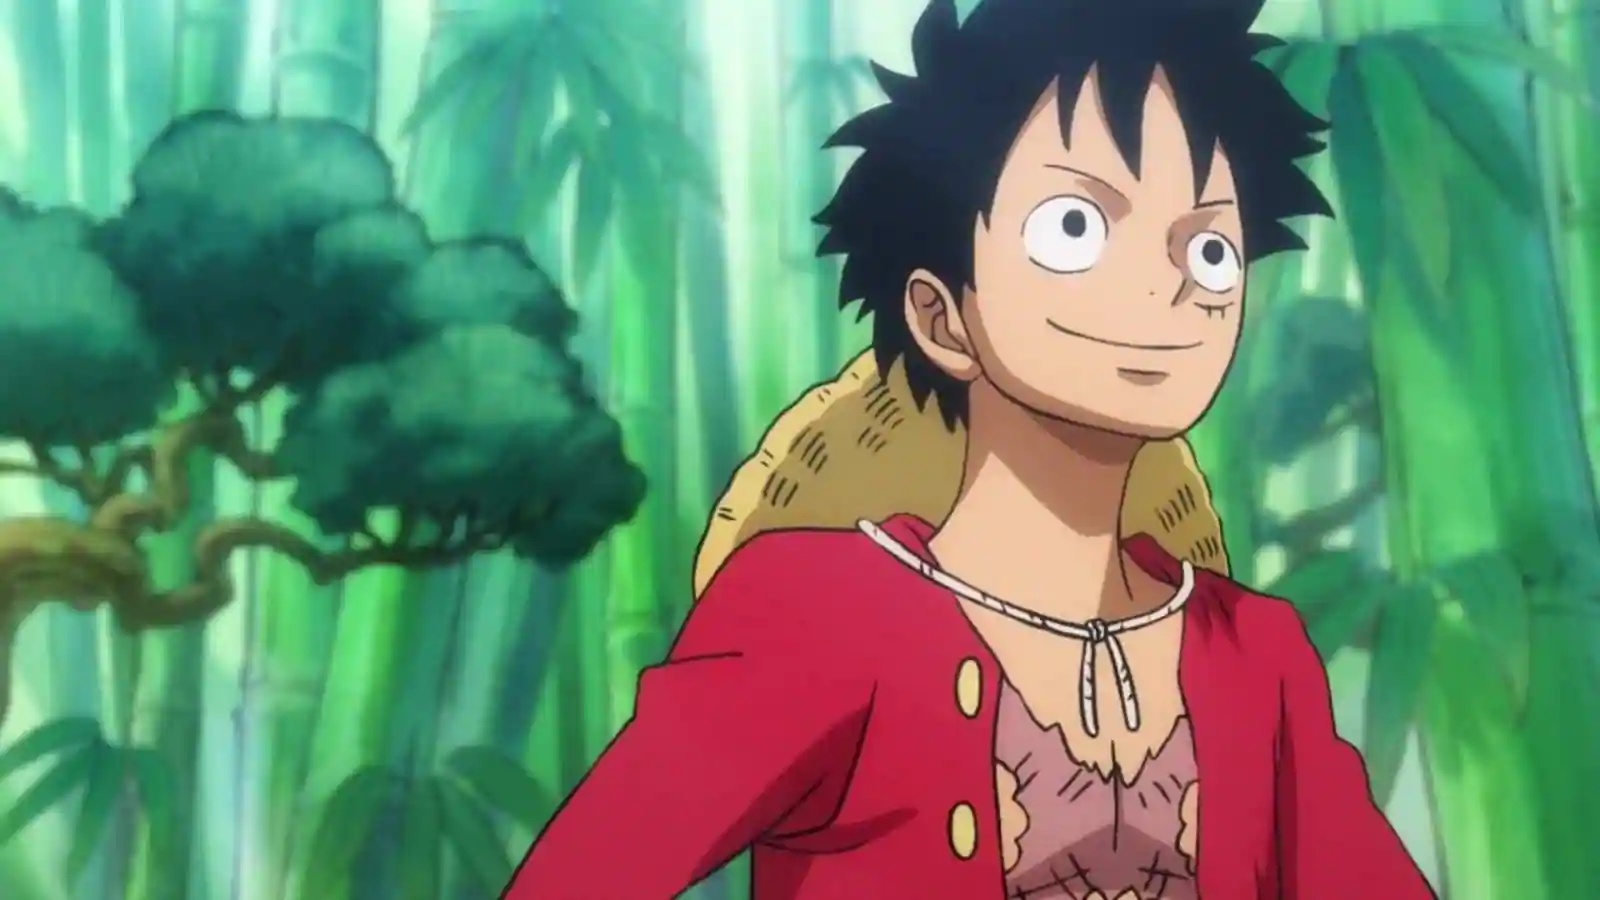 One Piece Chapter 1080 Release Date, Time, Spoilers, Preview, Watch Online, and More - Monkey D Luffy